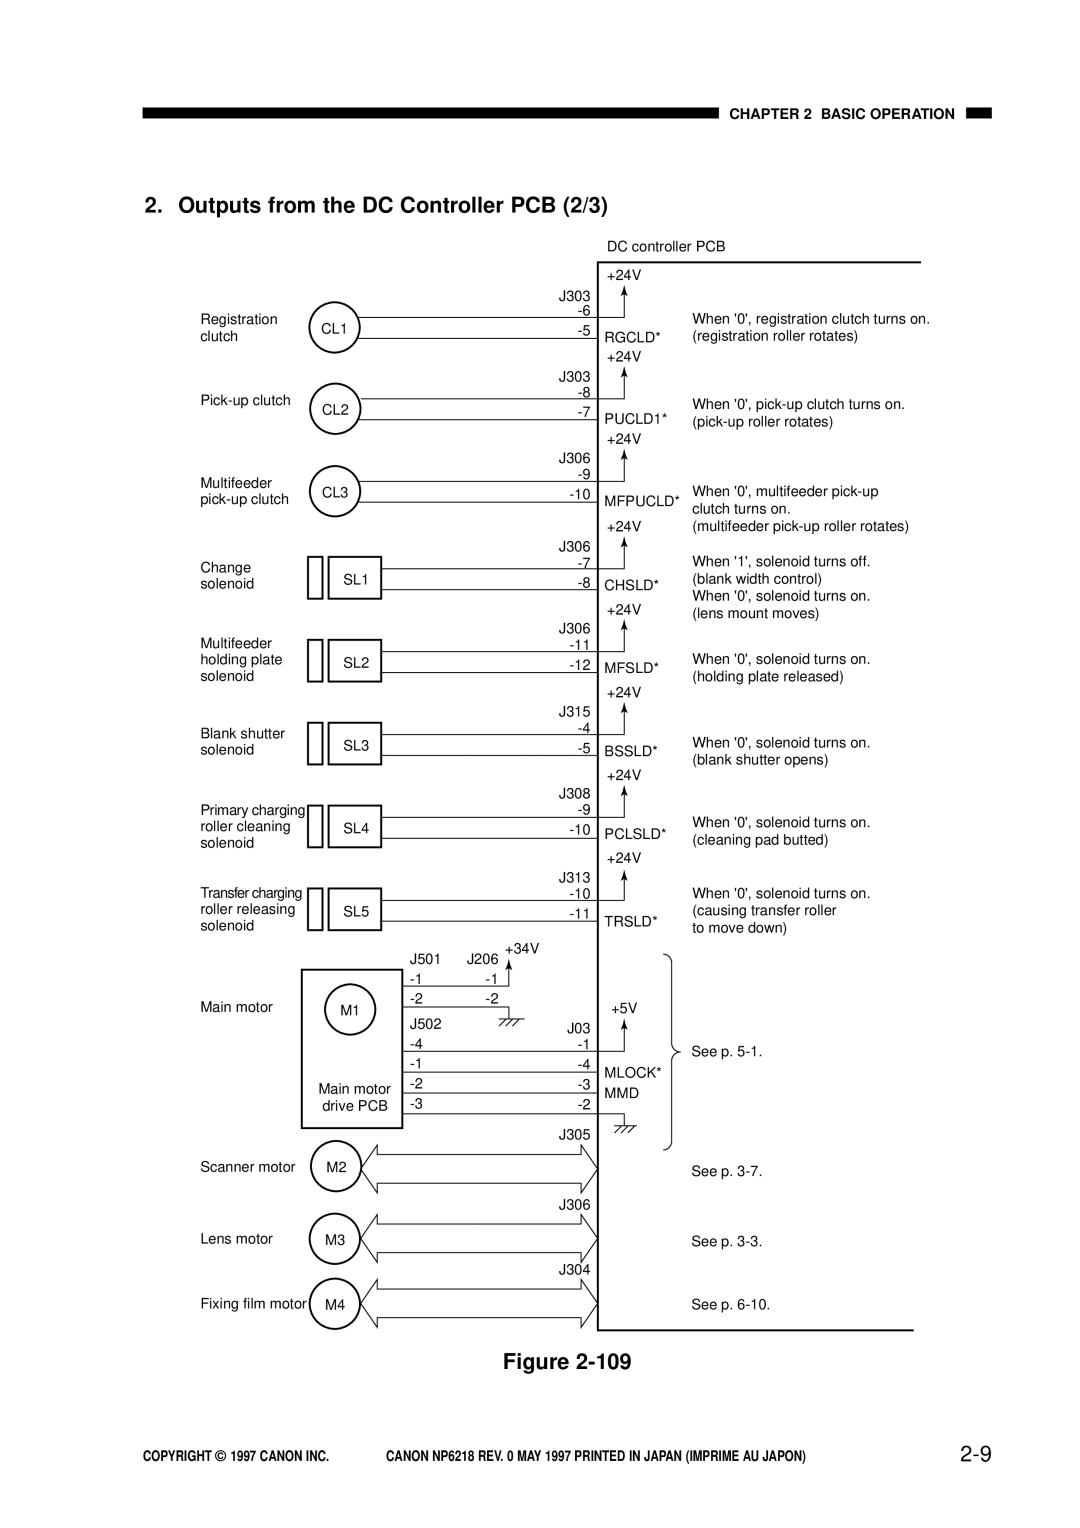 Canon FY8-13EX-000, NP6218 service manual Outputs from the DC Controller PCB 2/3, Basic Operation, COPYRIGHT 1997 CANON INC 